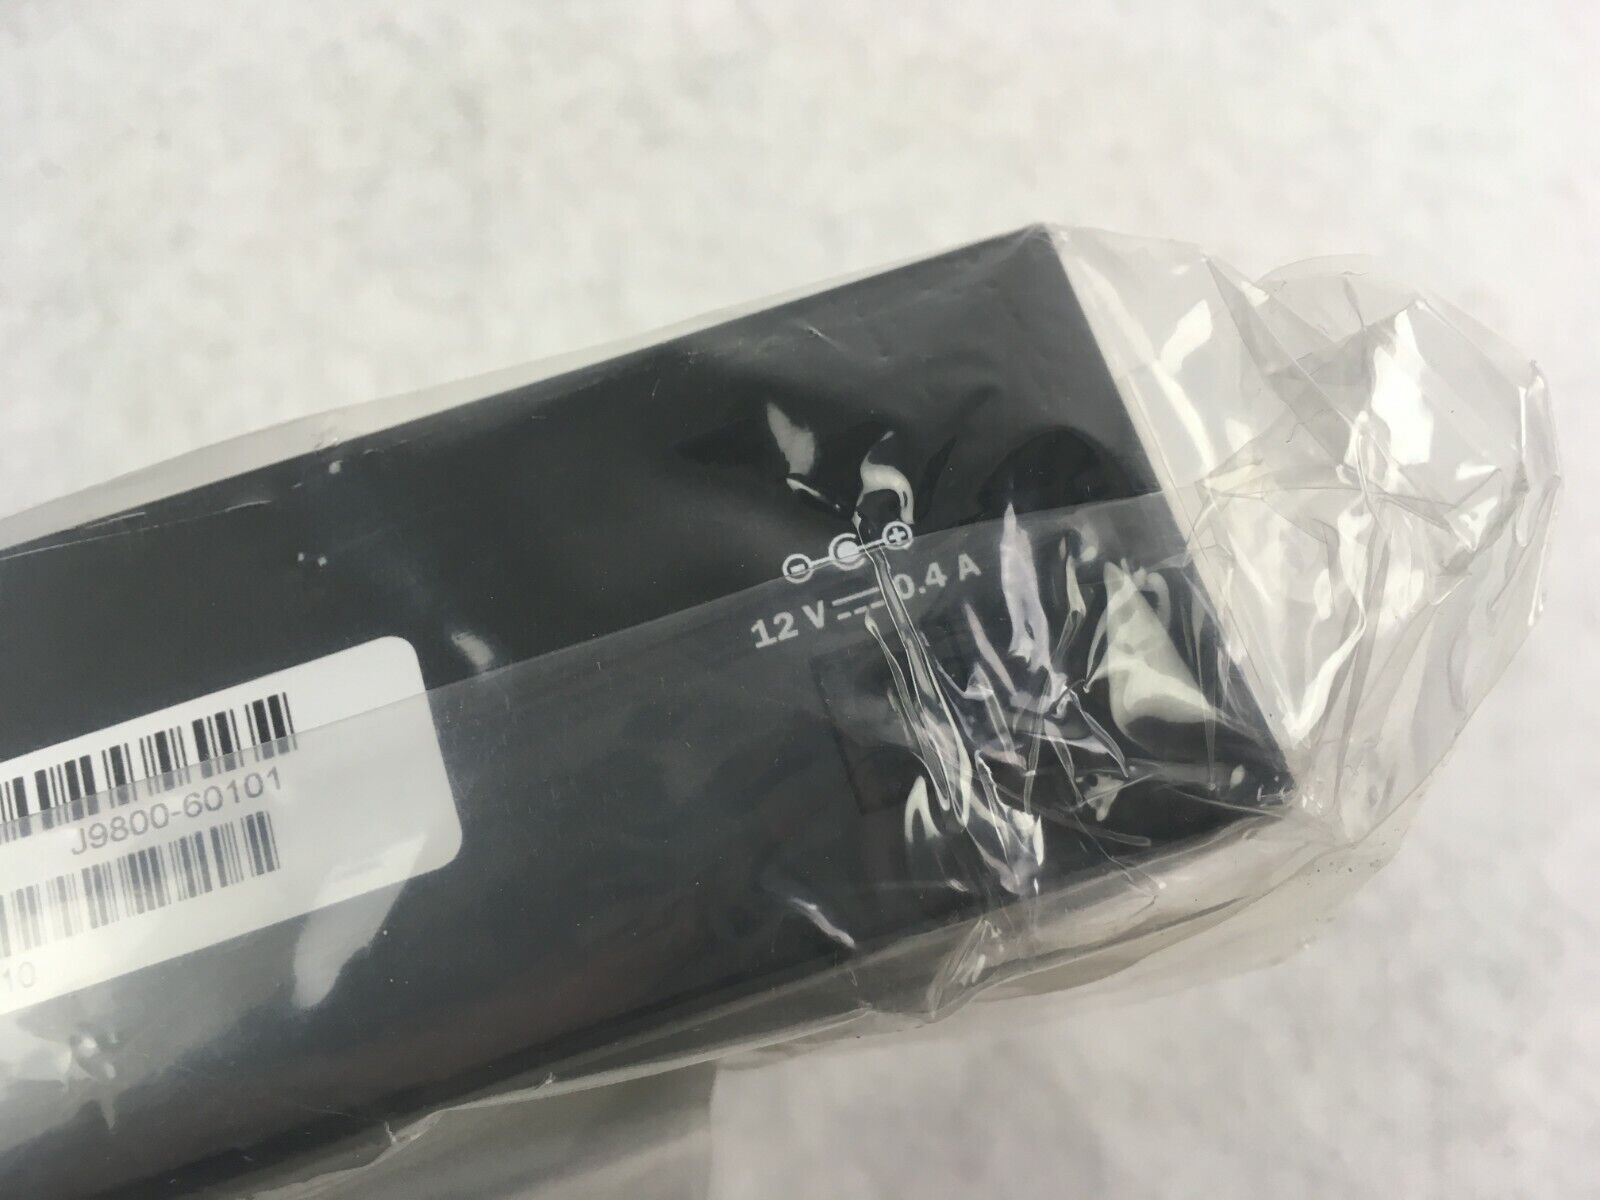 HP 1810-8 Switch J9800A Factory Sealed